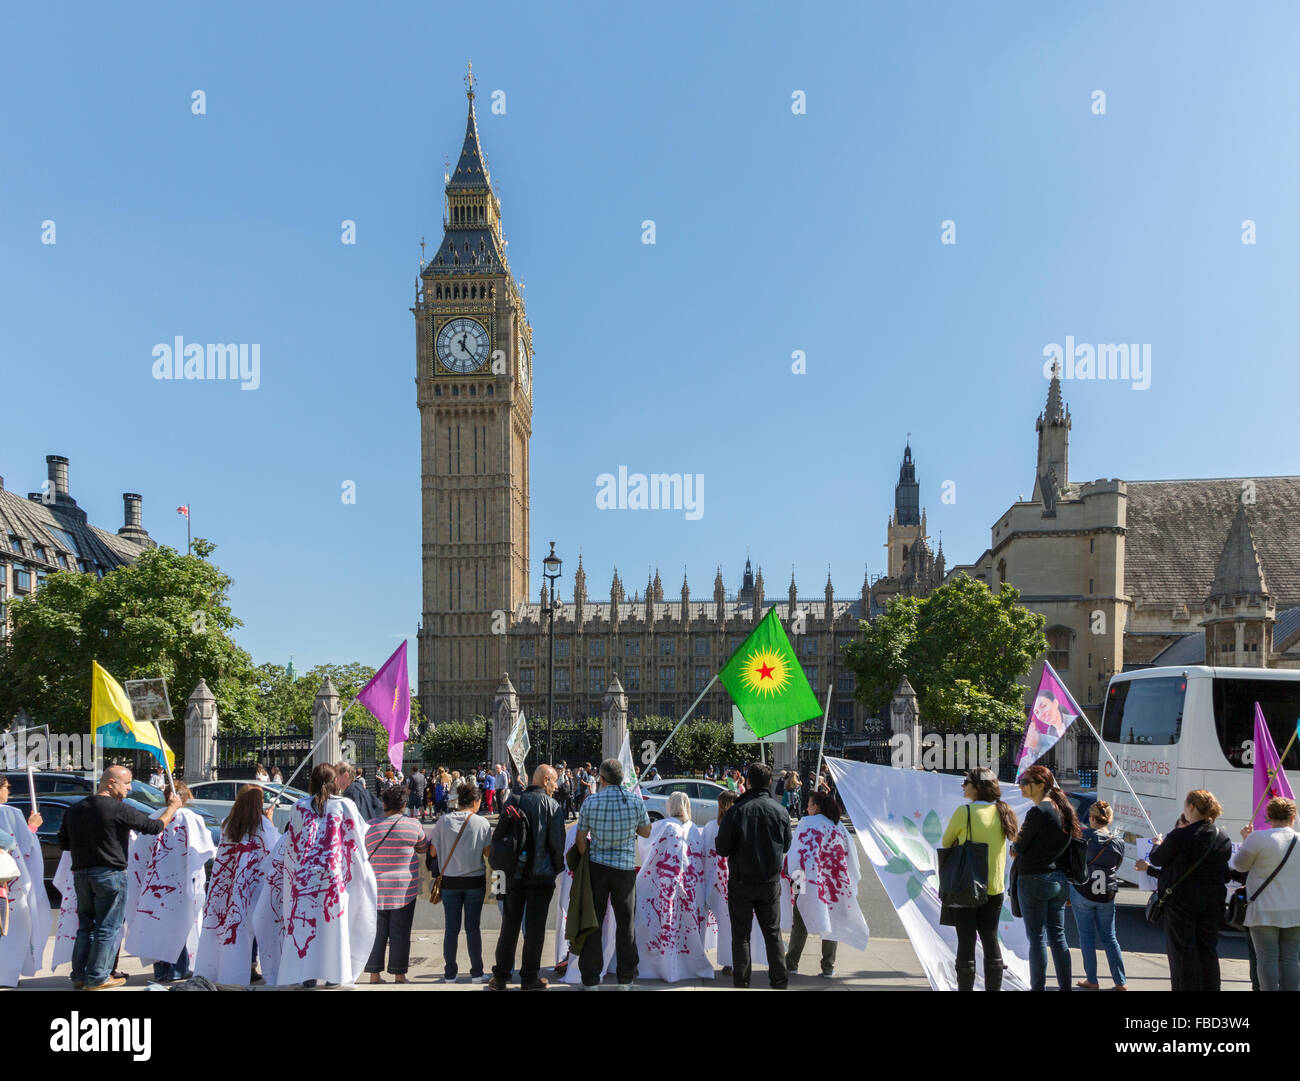 Demonstration in front of the Palace of Westminster with Big Ben, London, United Kingdom Stock Photo